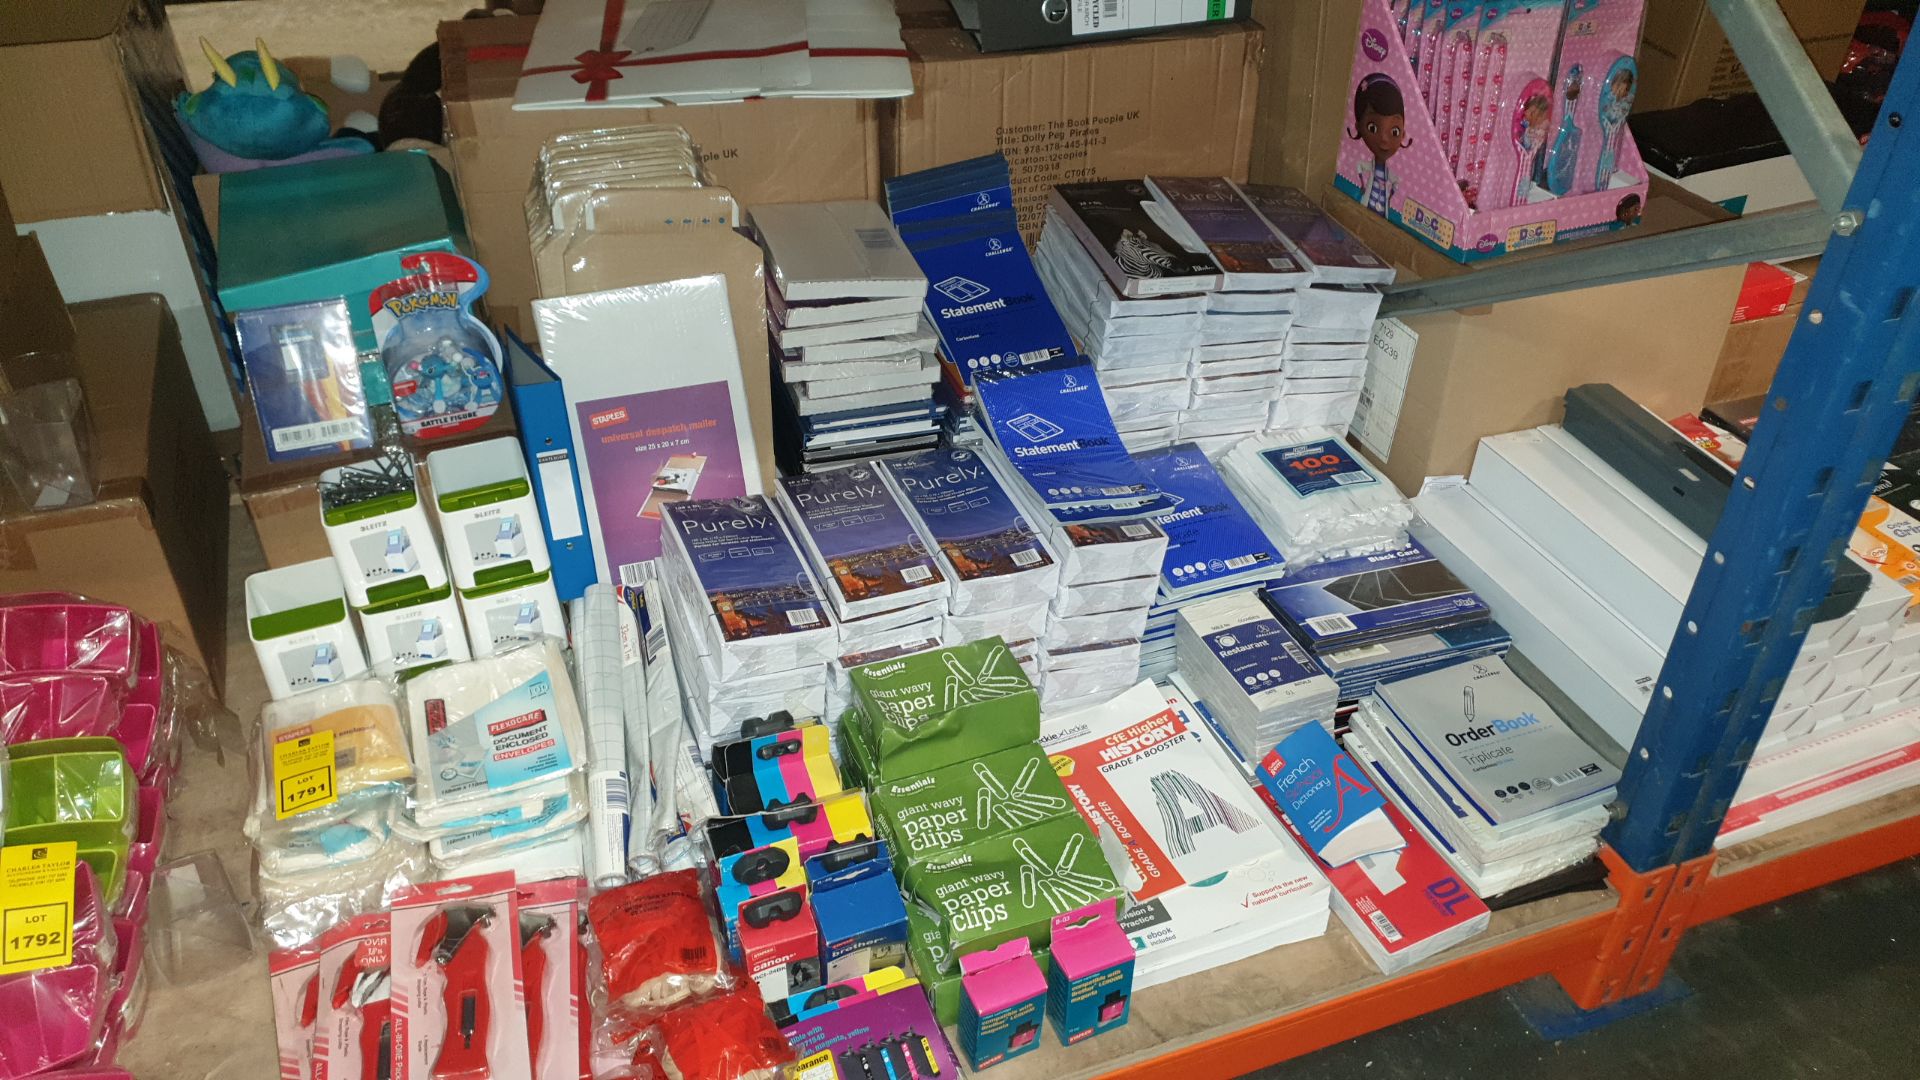 (LOT FOR THURSDAY 28TH MAY AUCTION) MISC LOT OF MAINLY STATIONERY ITEMS IN 1/2 A BAY IE. NOTE